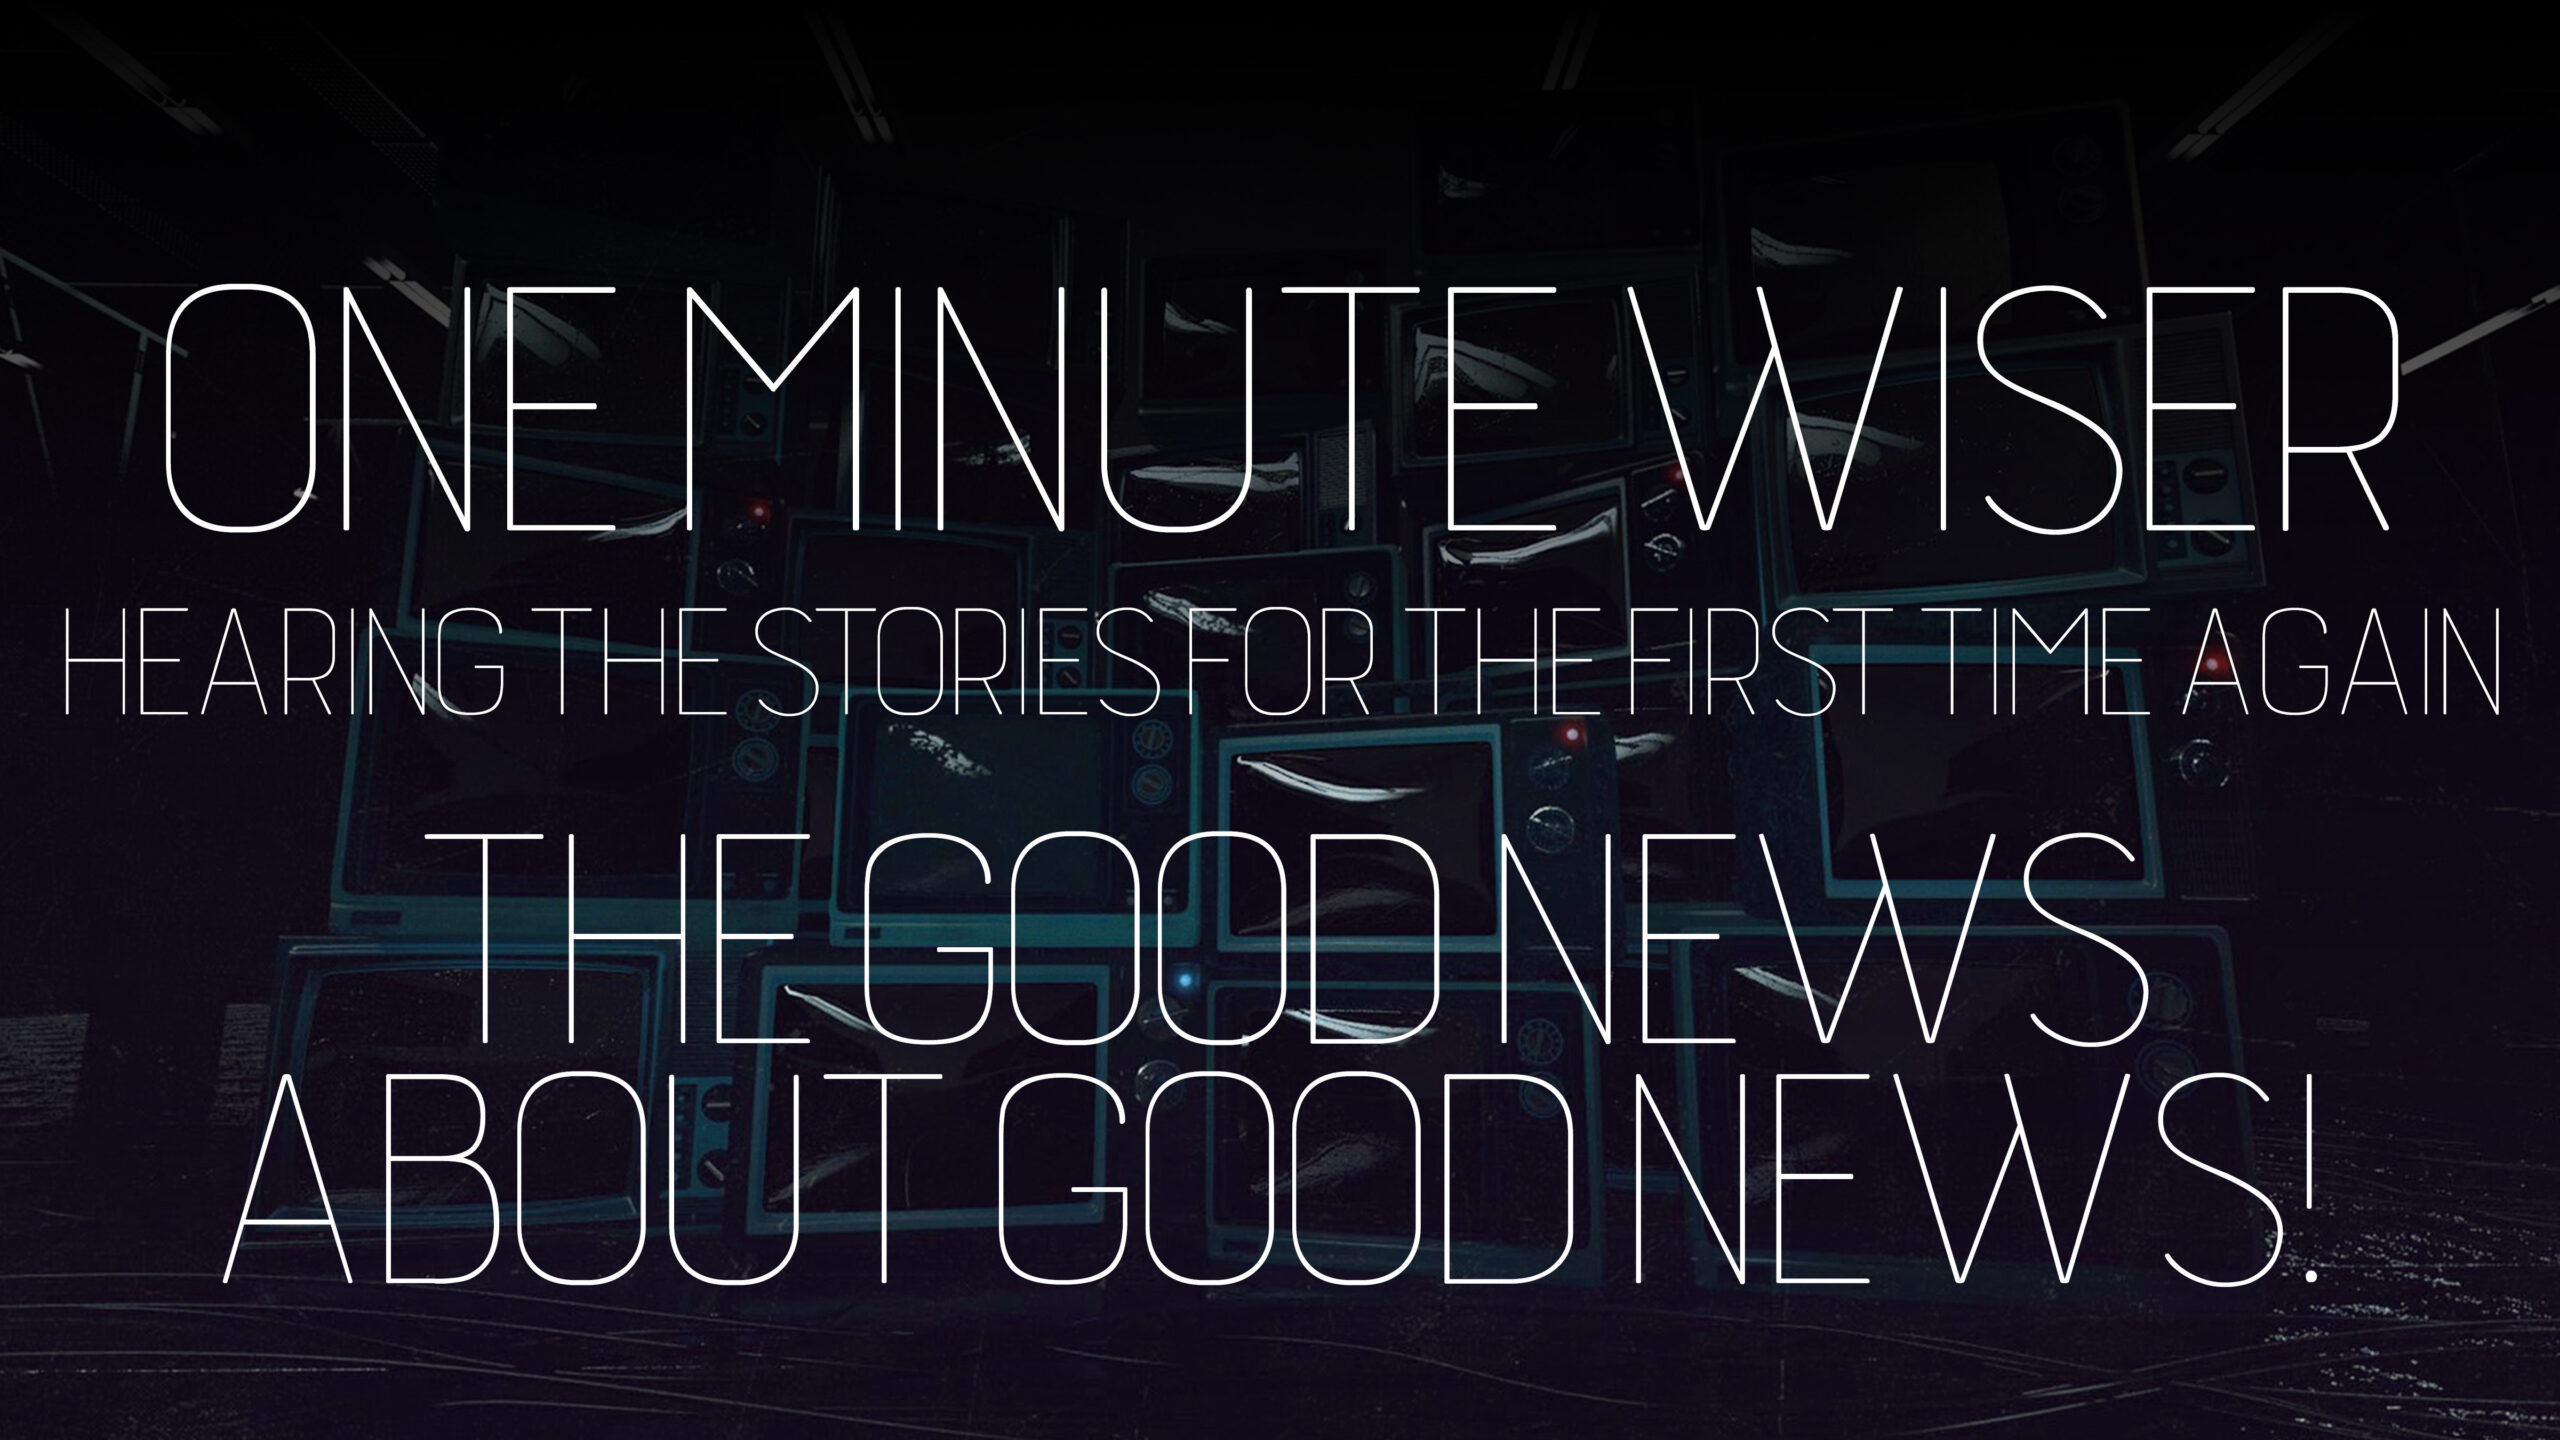 One Minute Wiser Part 6 "Good News About Good News!" (Traditional)